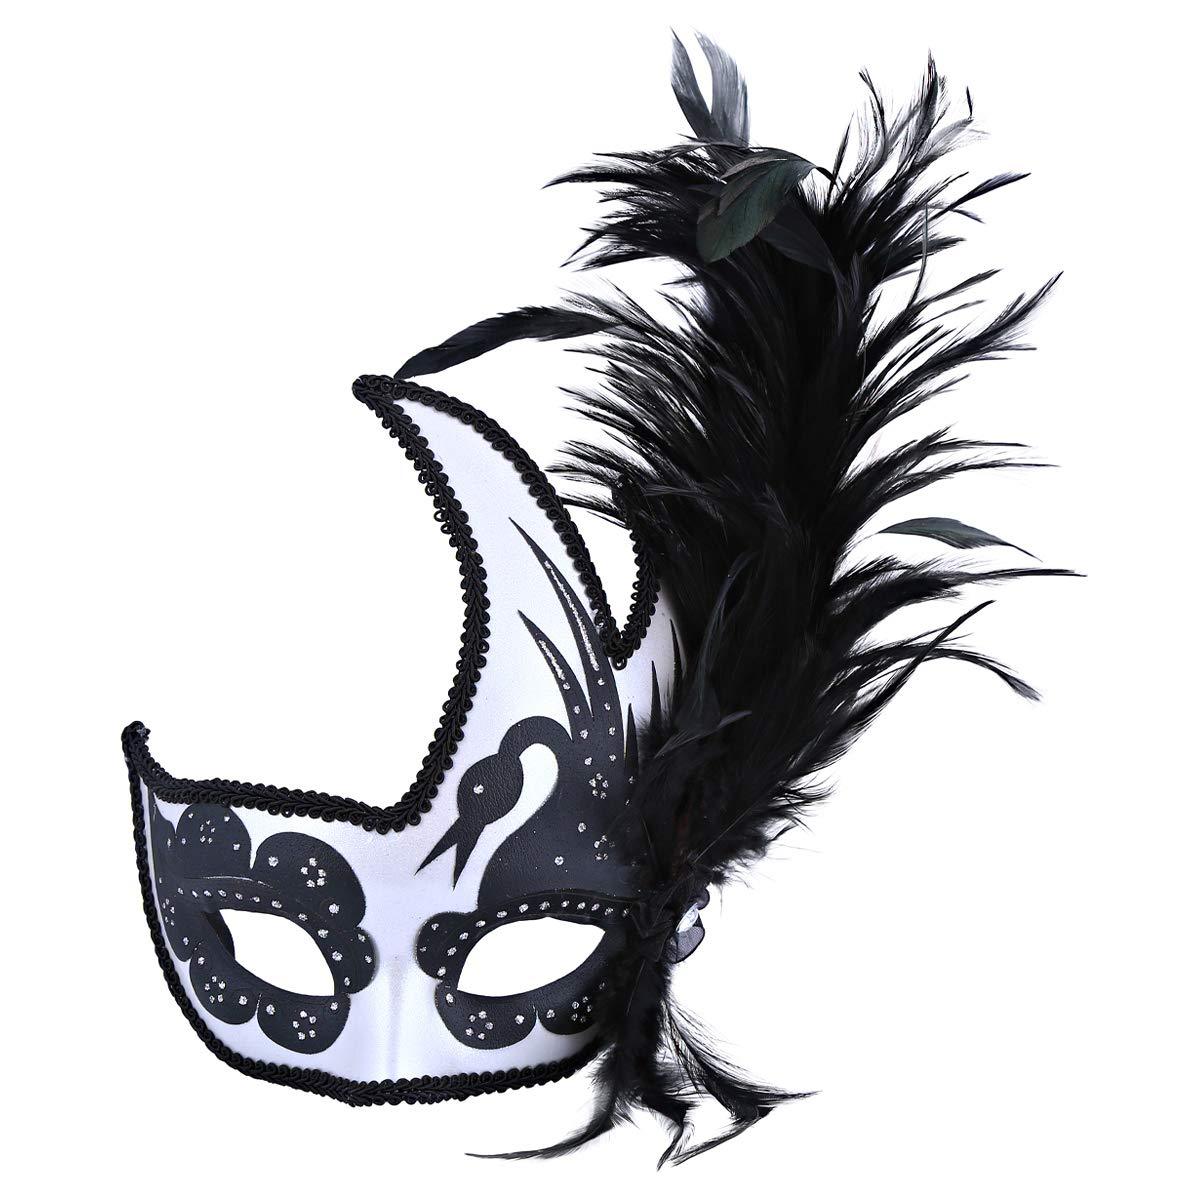 Daweigao Party Mask - PF3189, Black and Silver